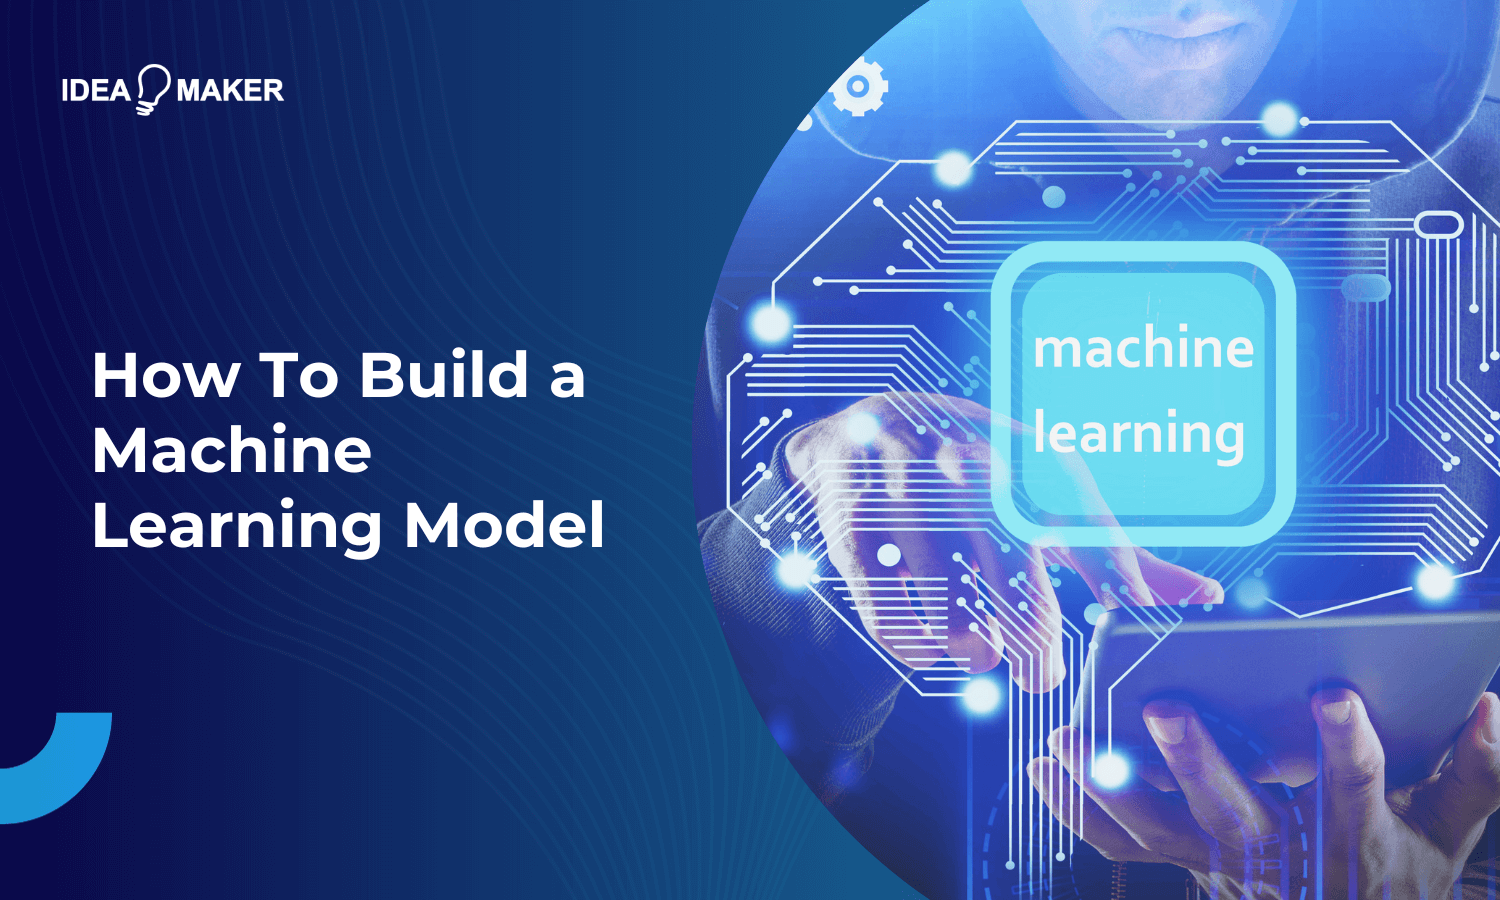 How to Build a Machine Learning Model?